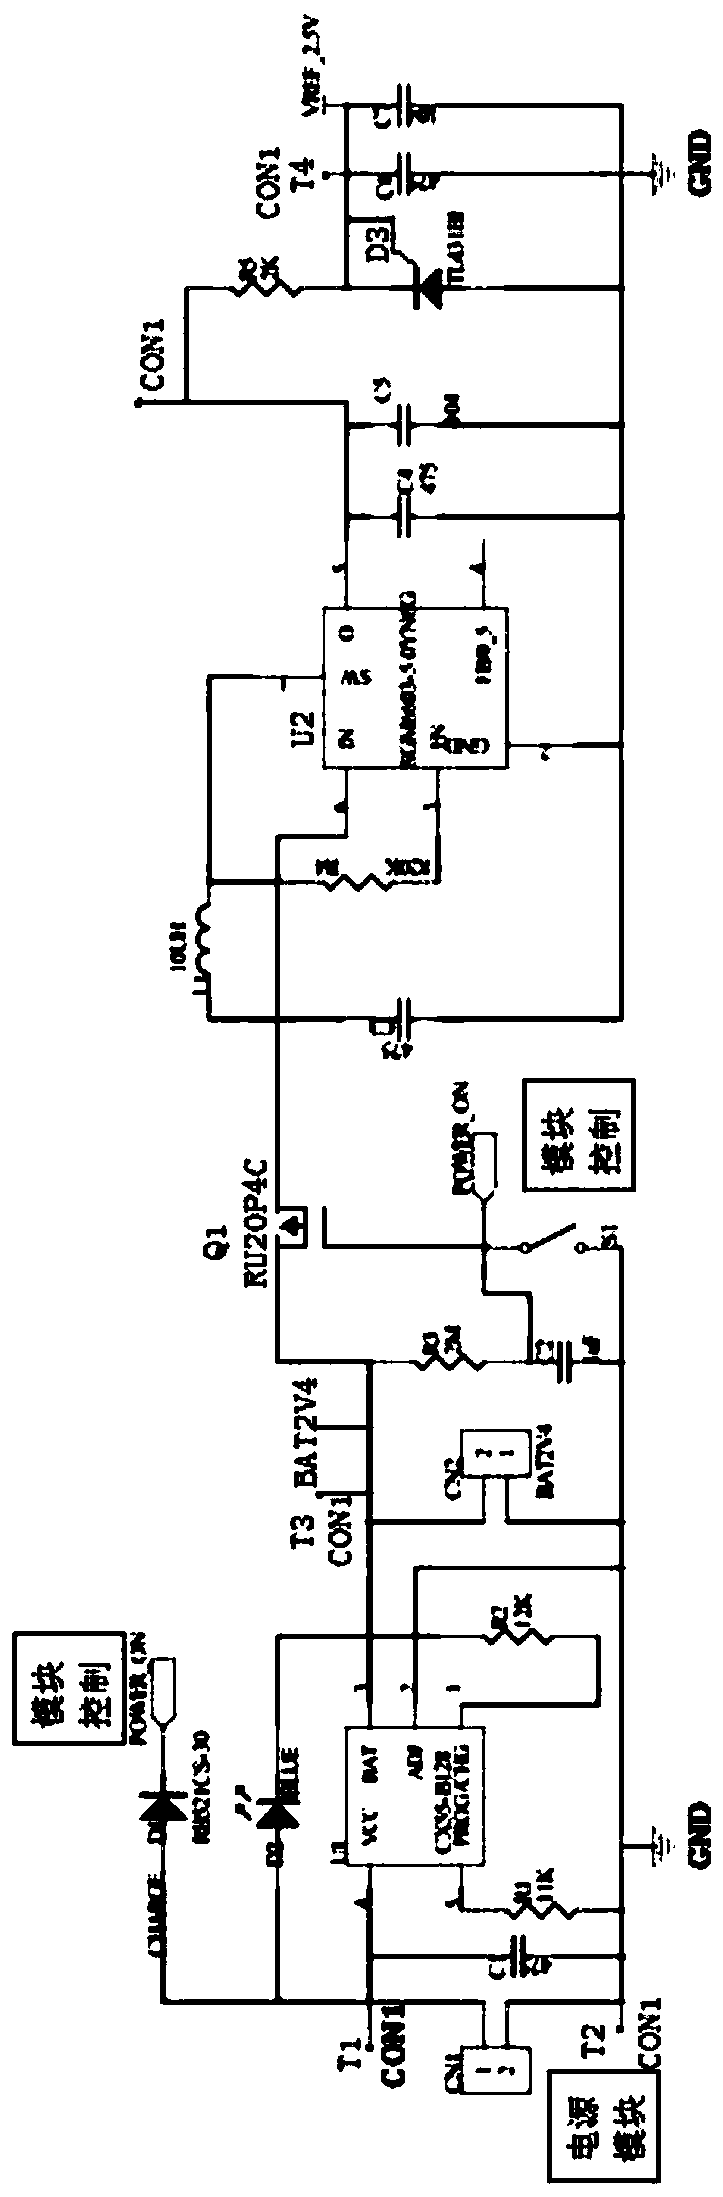 A control method for an electromagnetic capacitance dual-mode touch control system